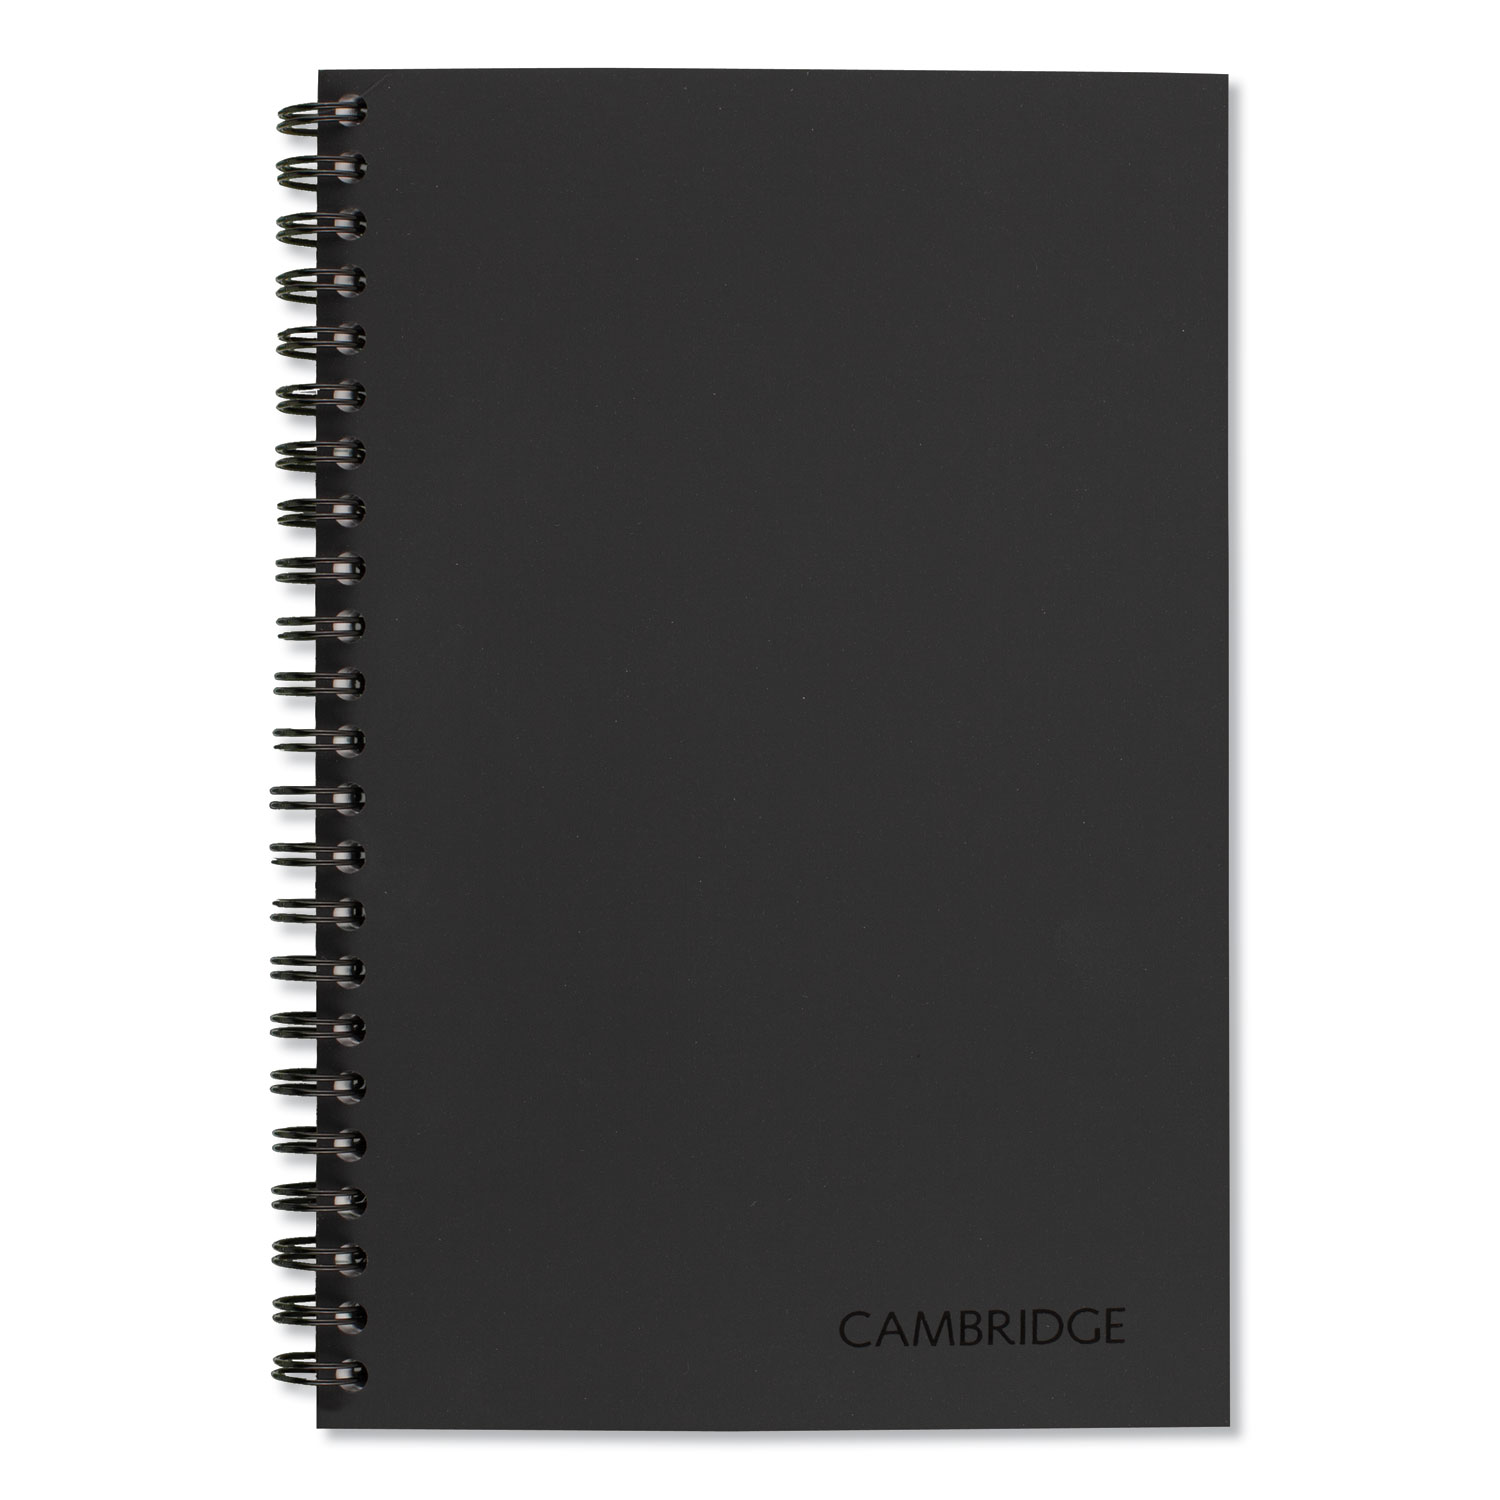  Cambridge 06096 Wirebound Guided Business Notebook, QuickNotes, Dark Gray Cover, 8 x 5, 80 Sheets (MEA06096) 